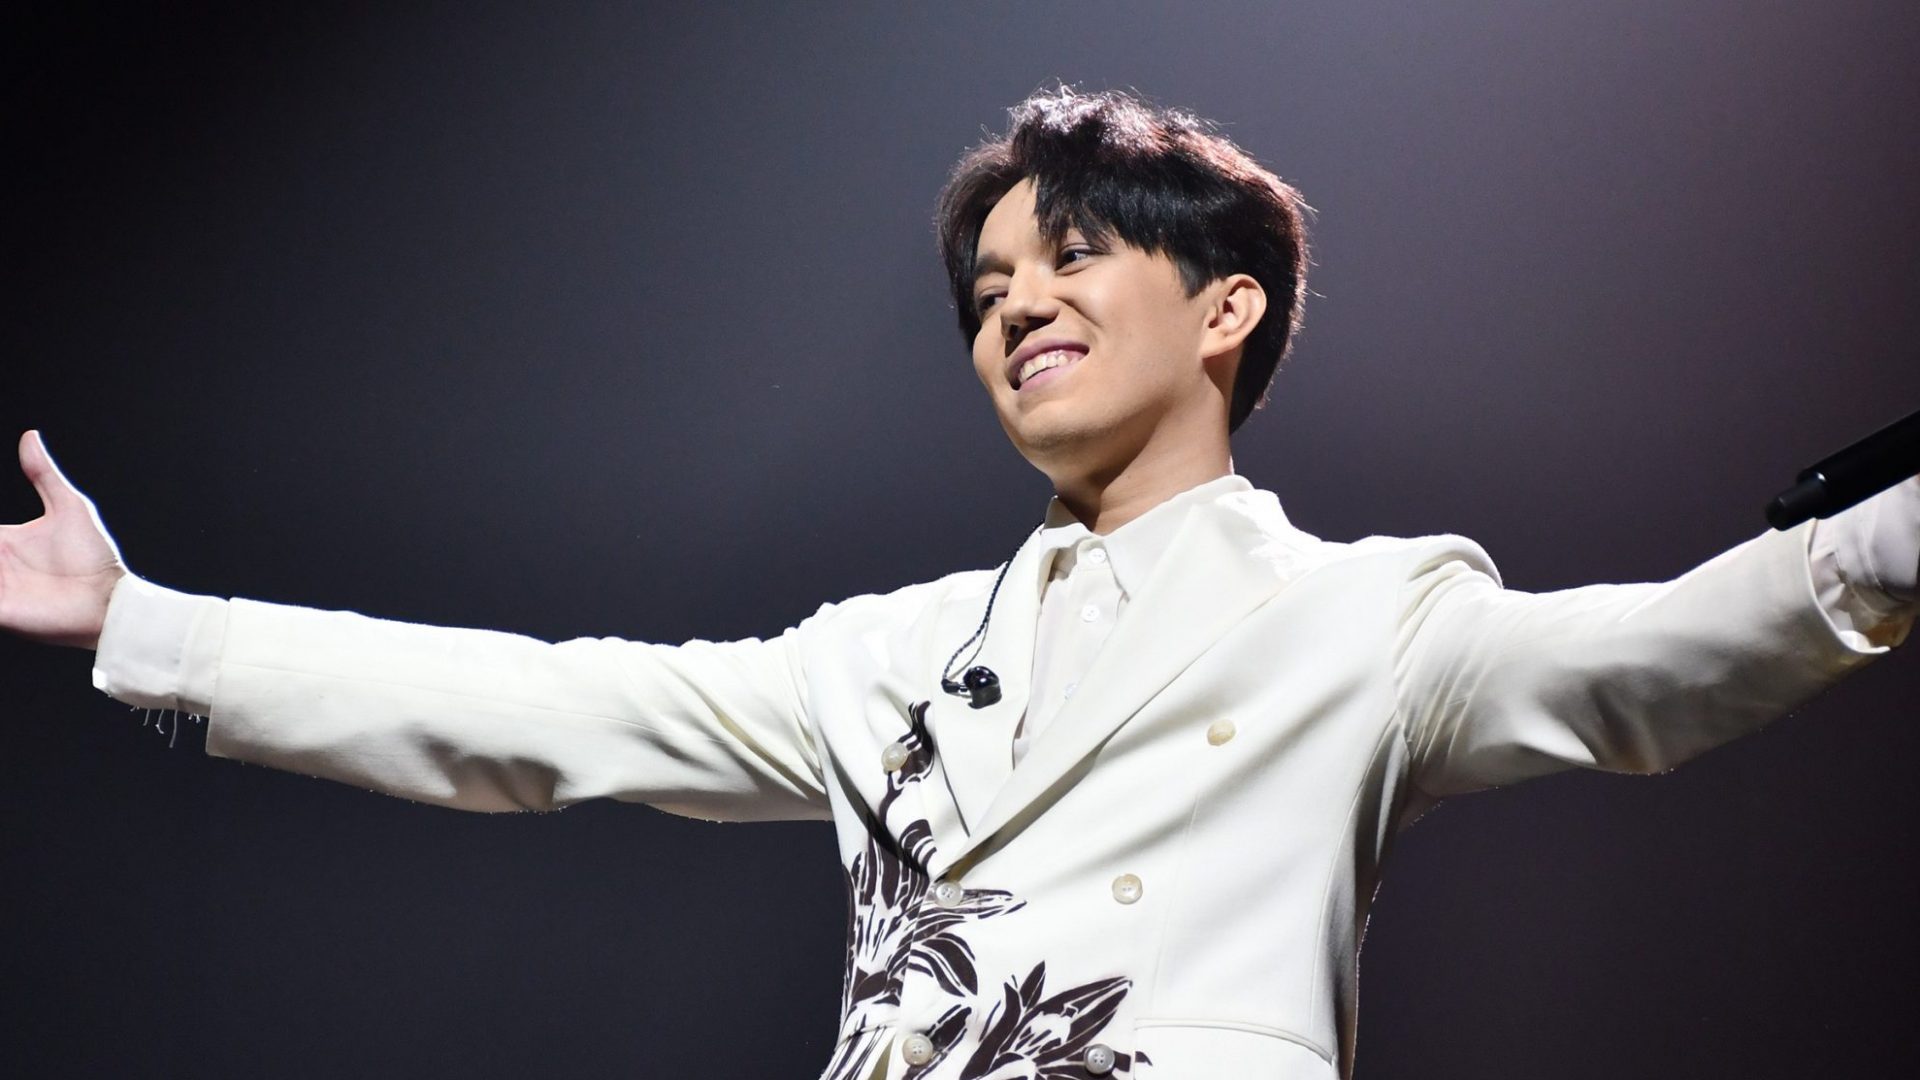 SALES FOR DIMASH KUDAIBERGEN’S CONCERT IN ALMATY ARE GOING RAPIDLY